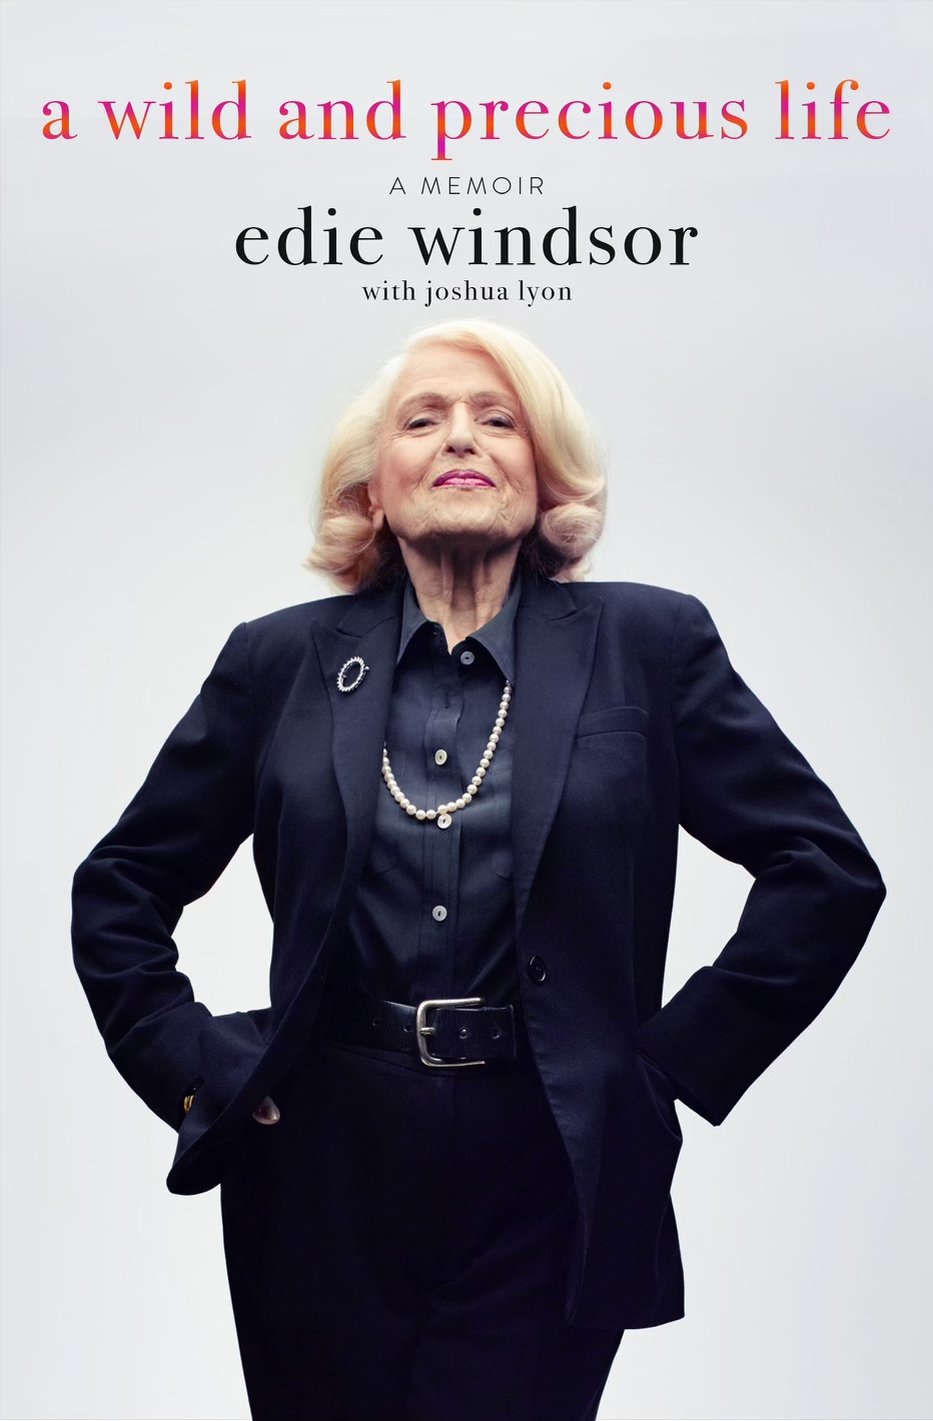 "A Wild and Precious Life" by Edie Windsor and Joshua Lyon